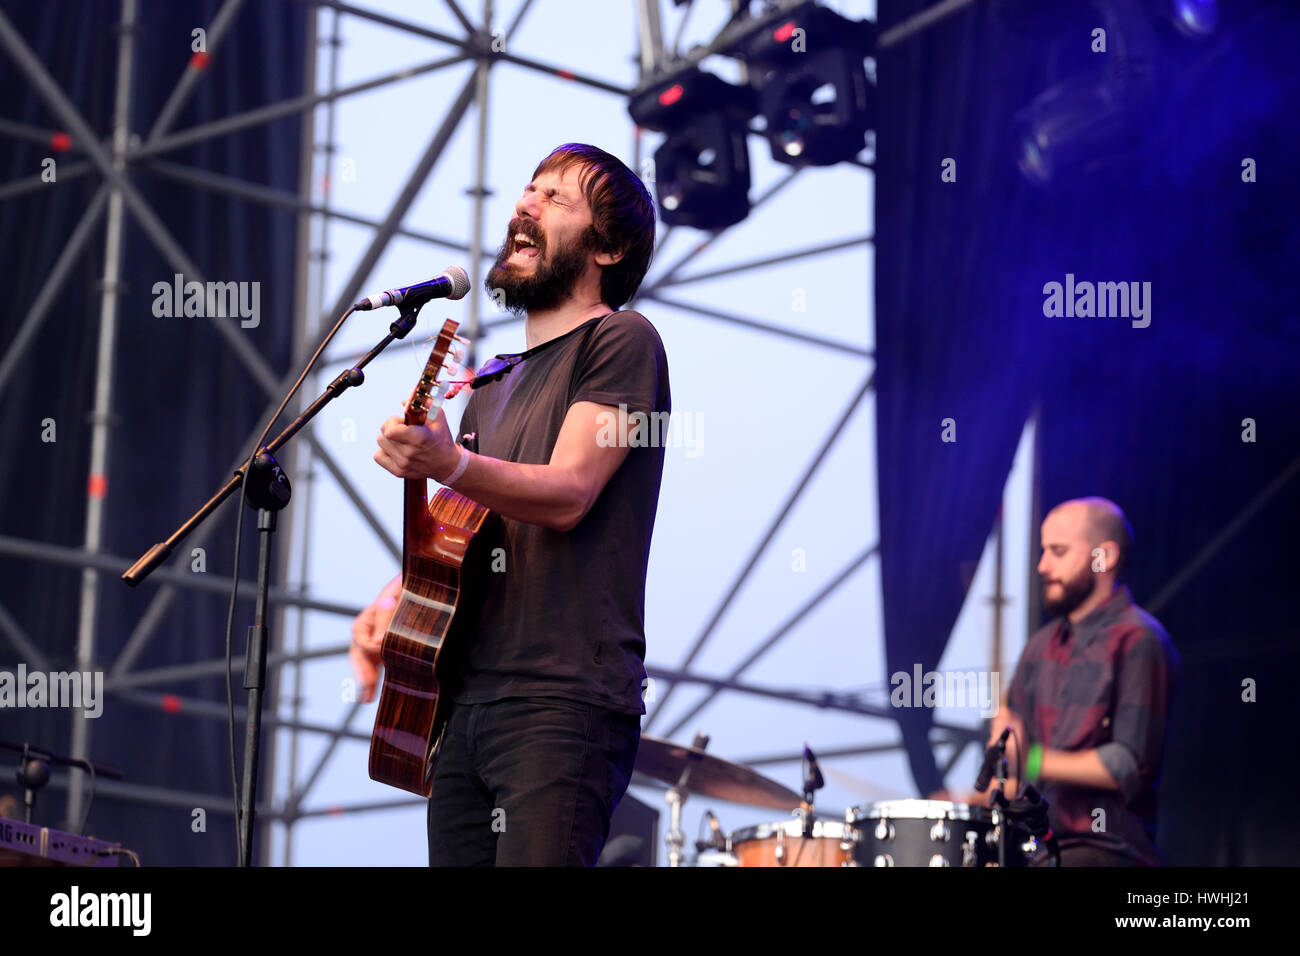 VALENCIA, SPAIN - APR 4: Standstill (band) performs at MBC Fest on April 4, 2015 in Valencia, Spain. Stock Photo